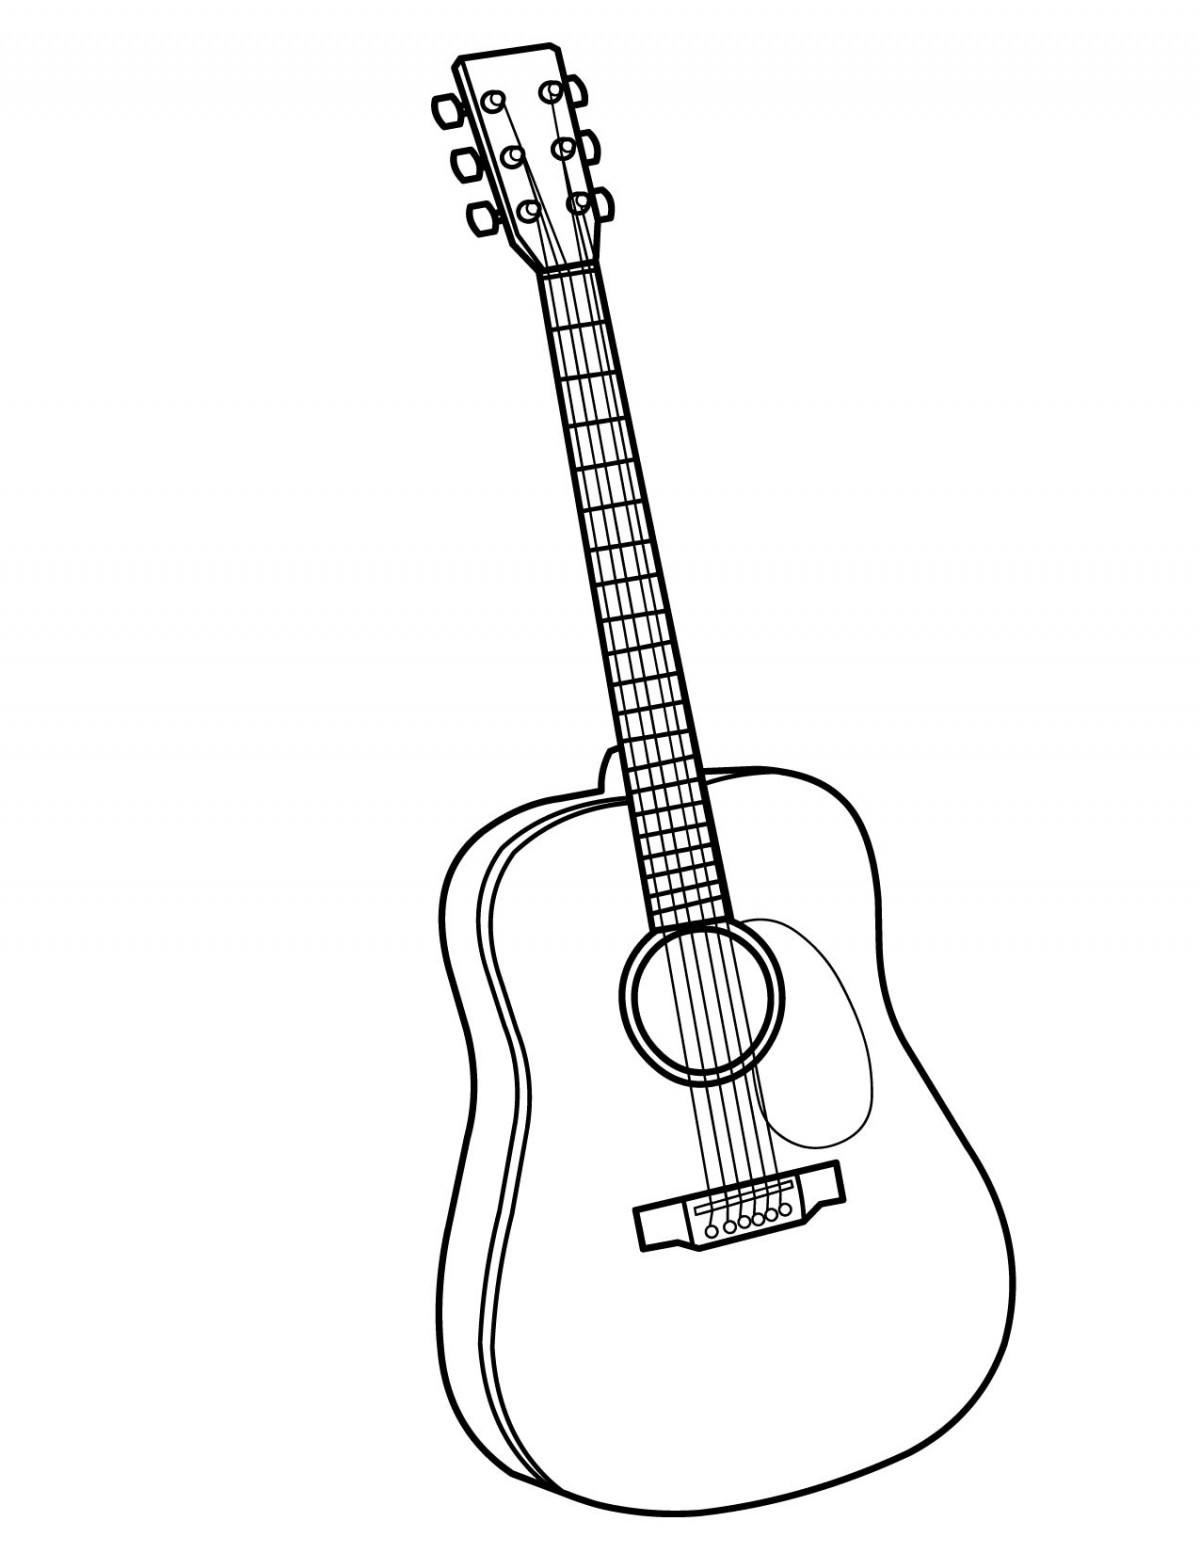 Guitar coloring pages to download and print for free